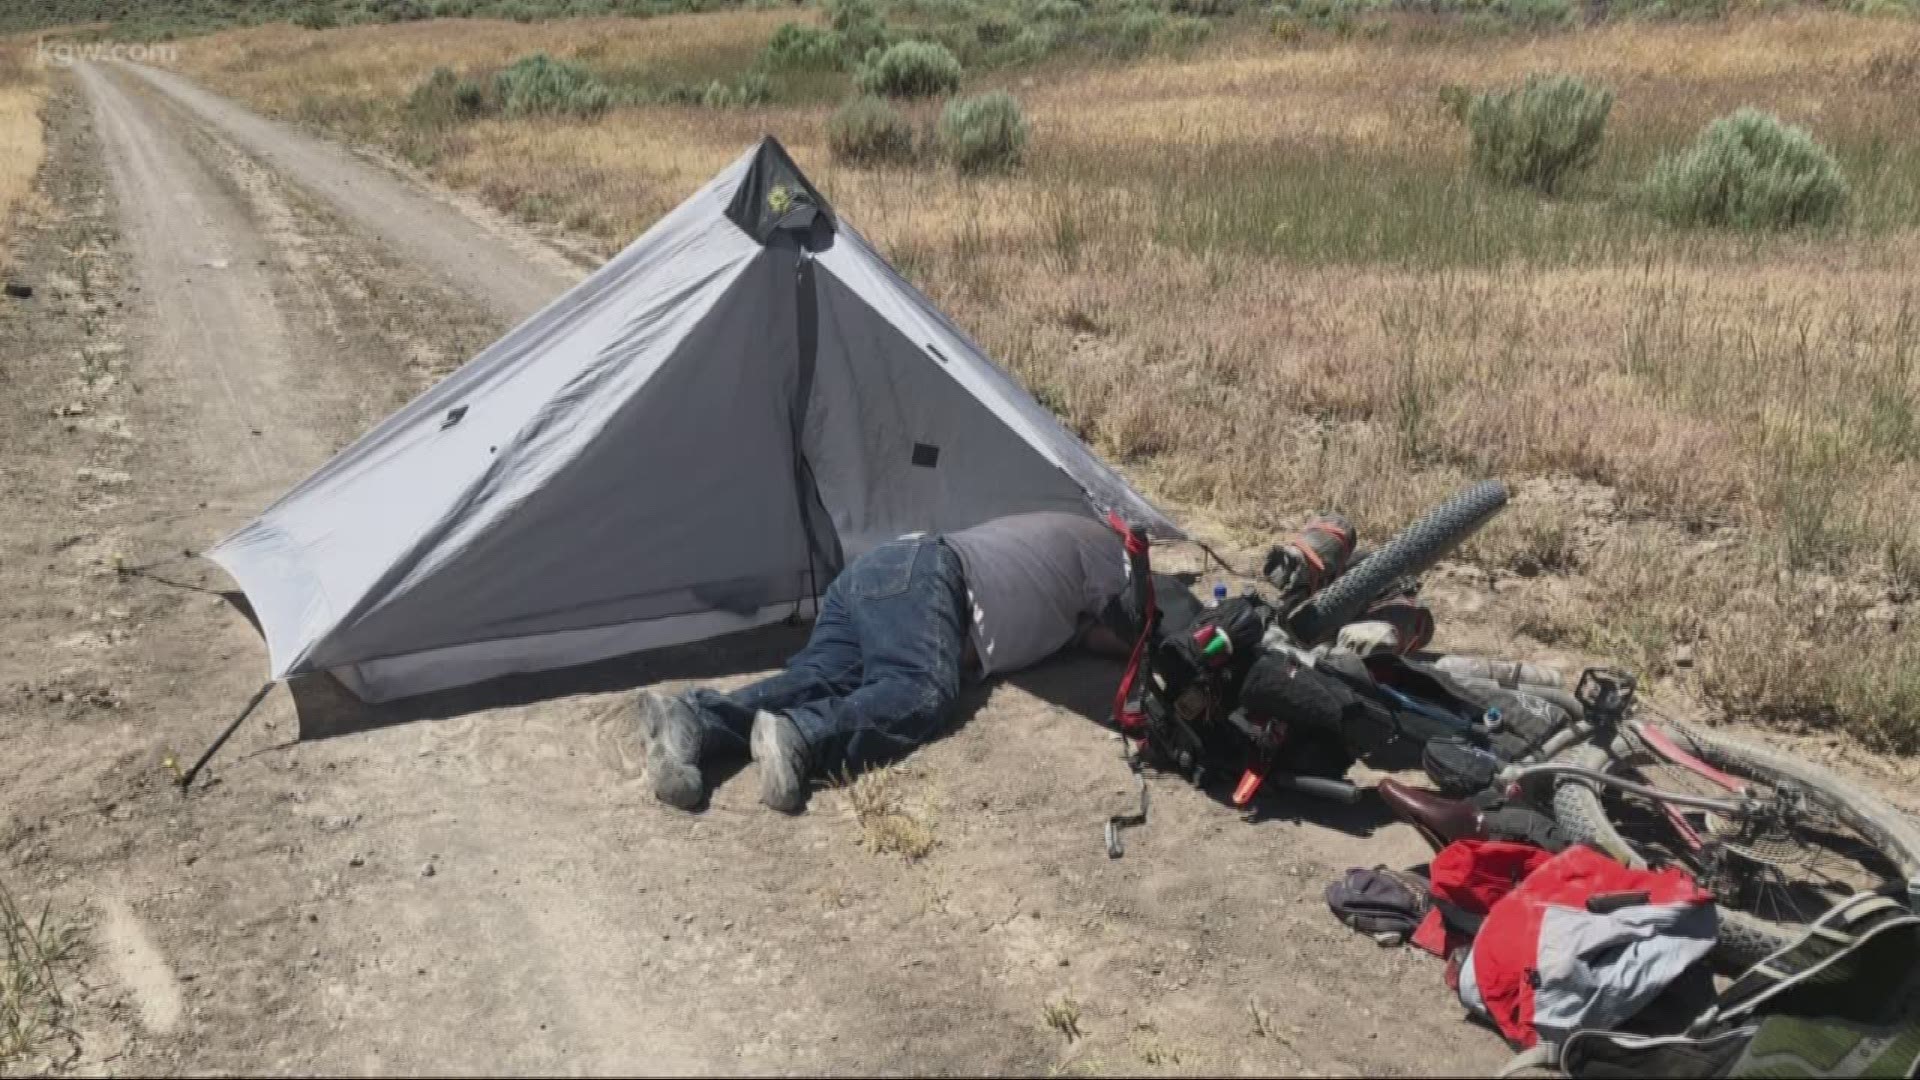 A 73-year-old man who was stranded in the remote Oregon high desert for four days with his two dogs was rescued when a long-distance mountain biker discovered him near death on a dirt road.